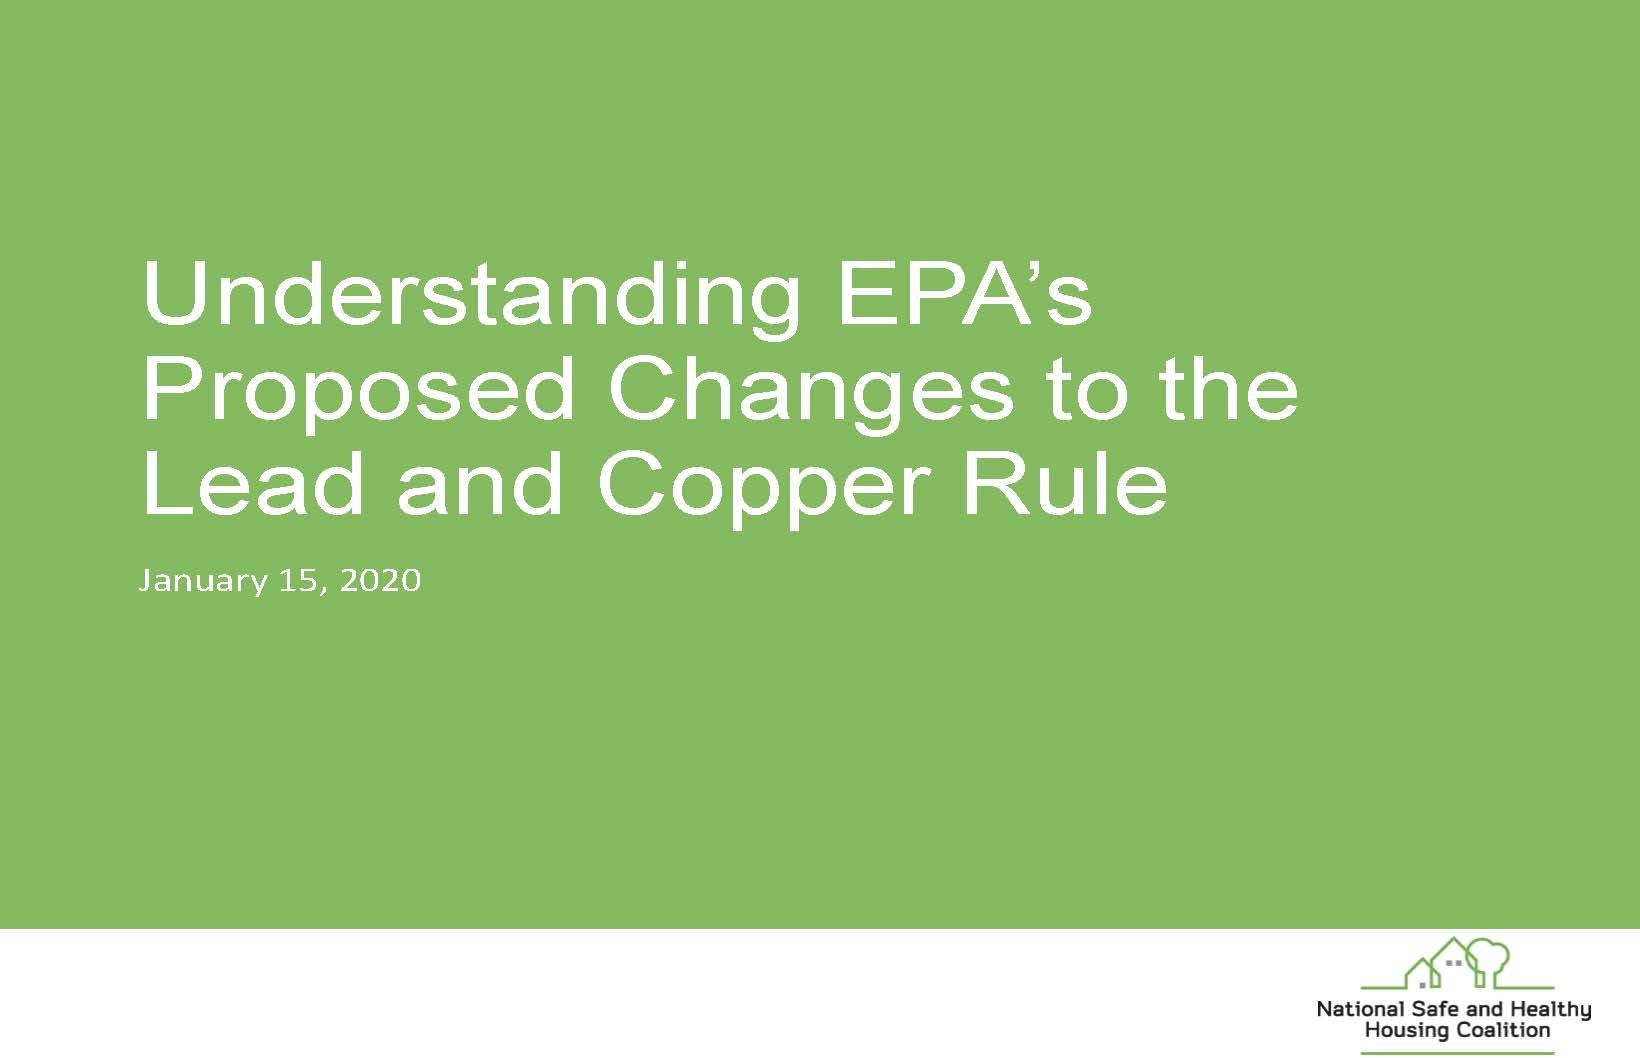 NSHHC Webinar: Understanding EPA's Proposed Changes to-the Lead and Copper Rule [slides]